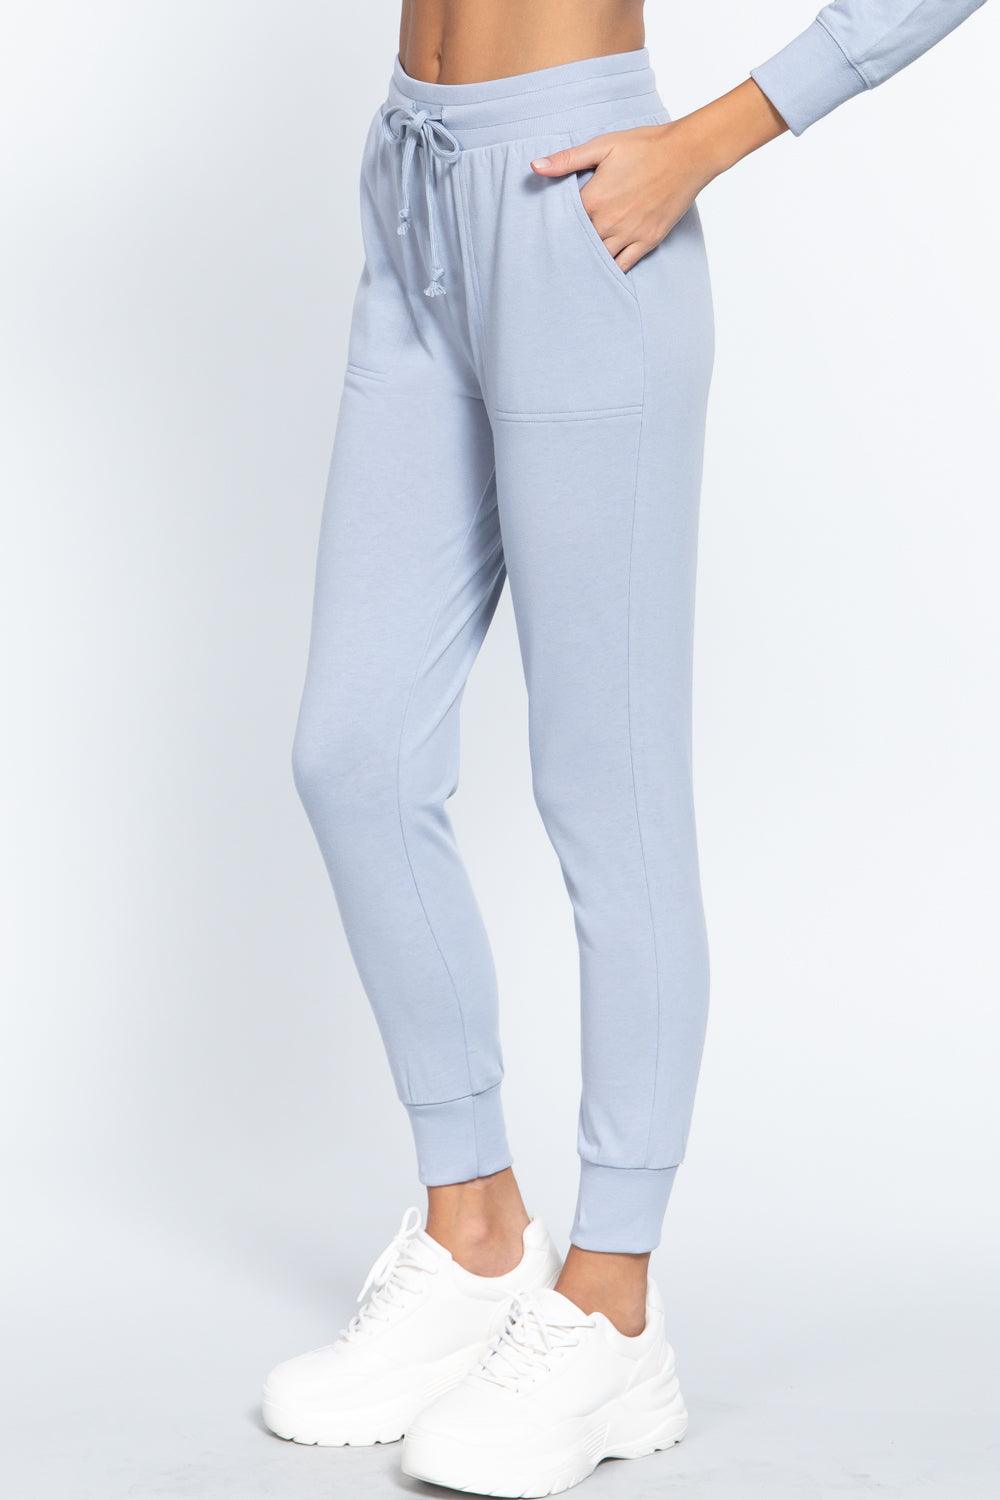 Waist Band Long Sweatpants With Pockets - Kreative Passions